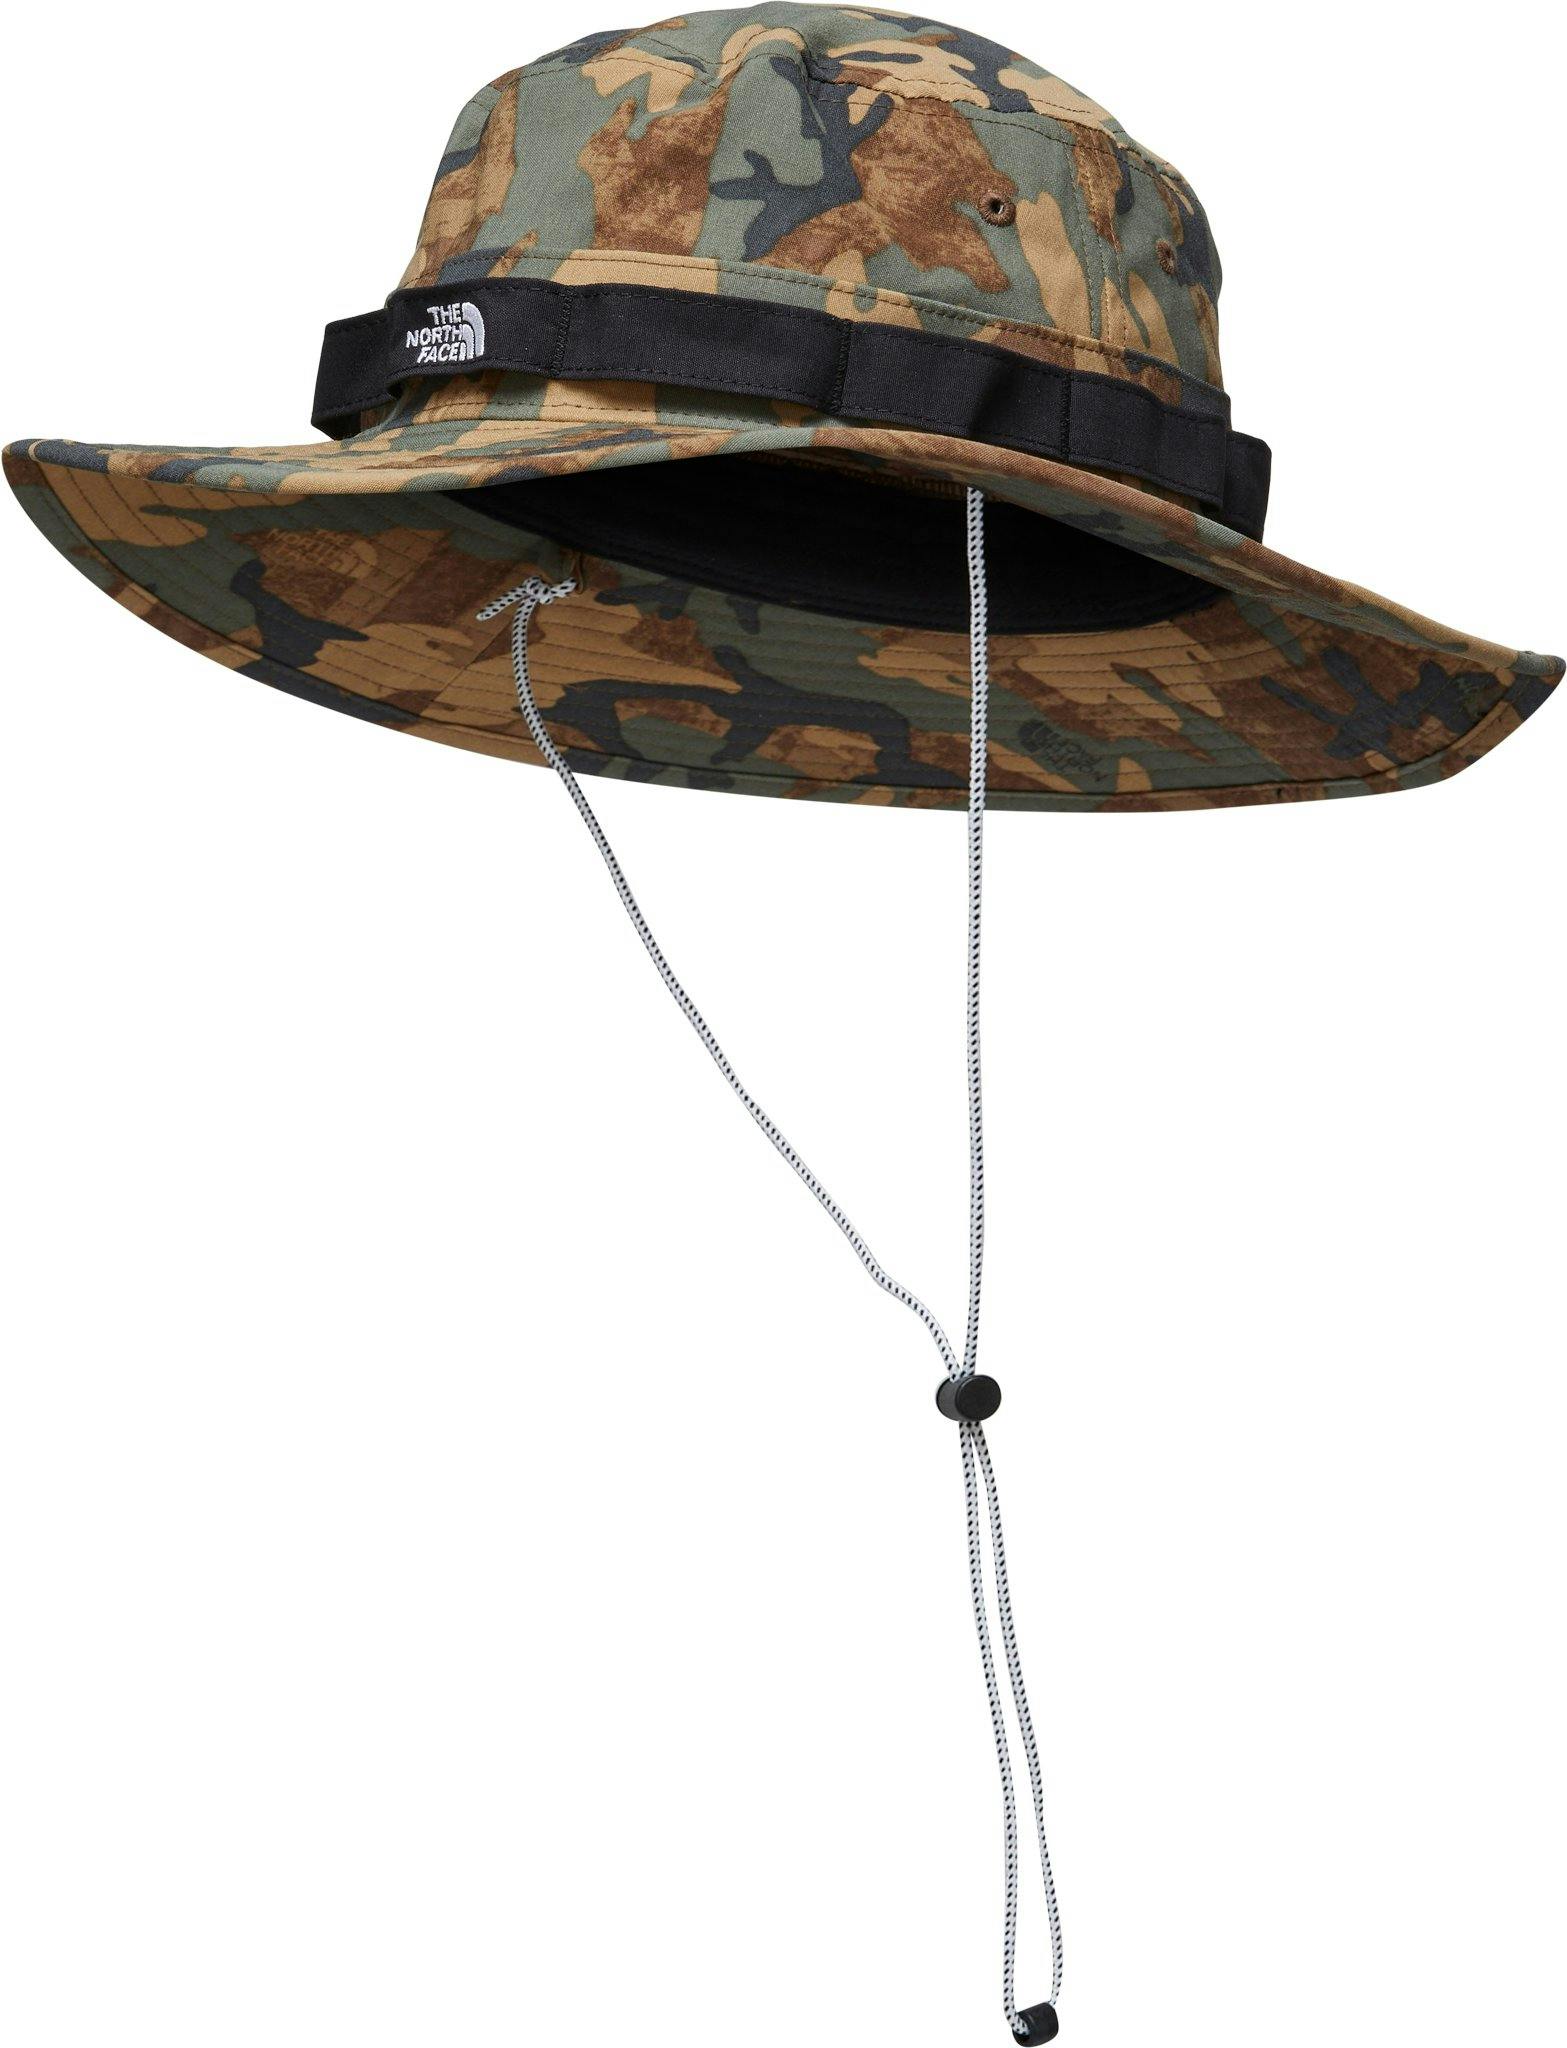 Product image for Class V Brimmer Hat - Unisex